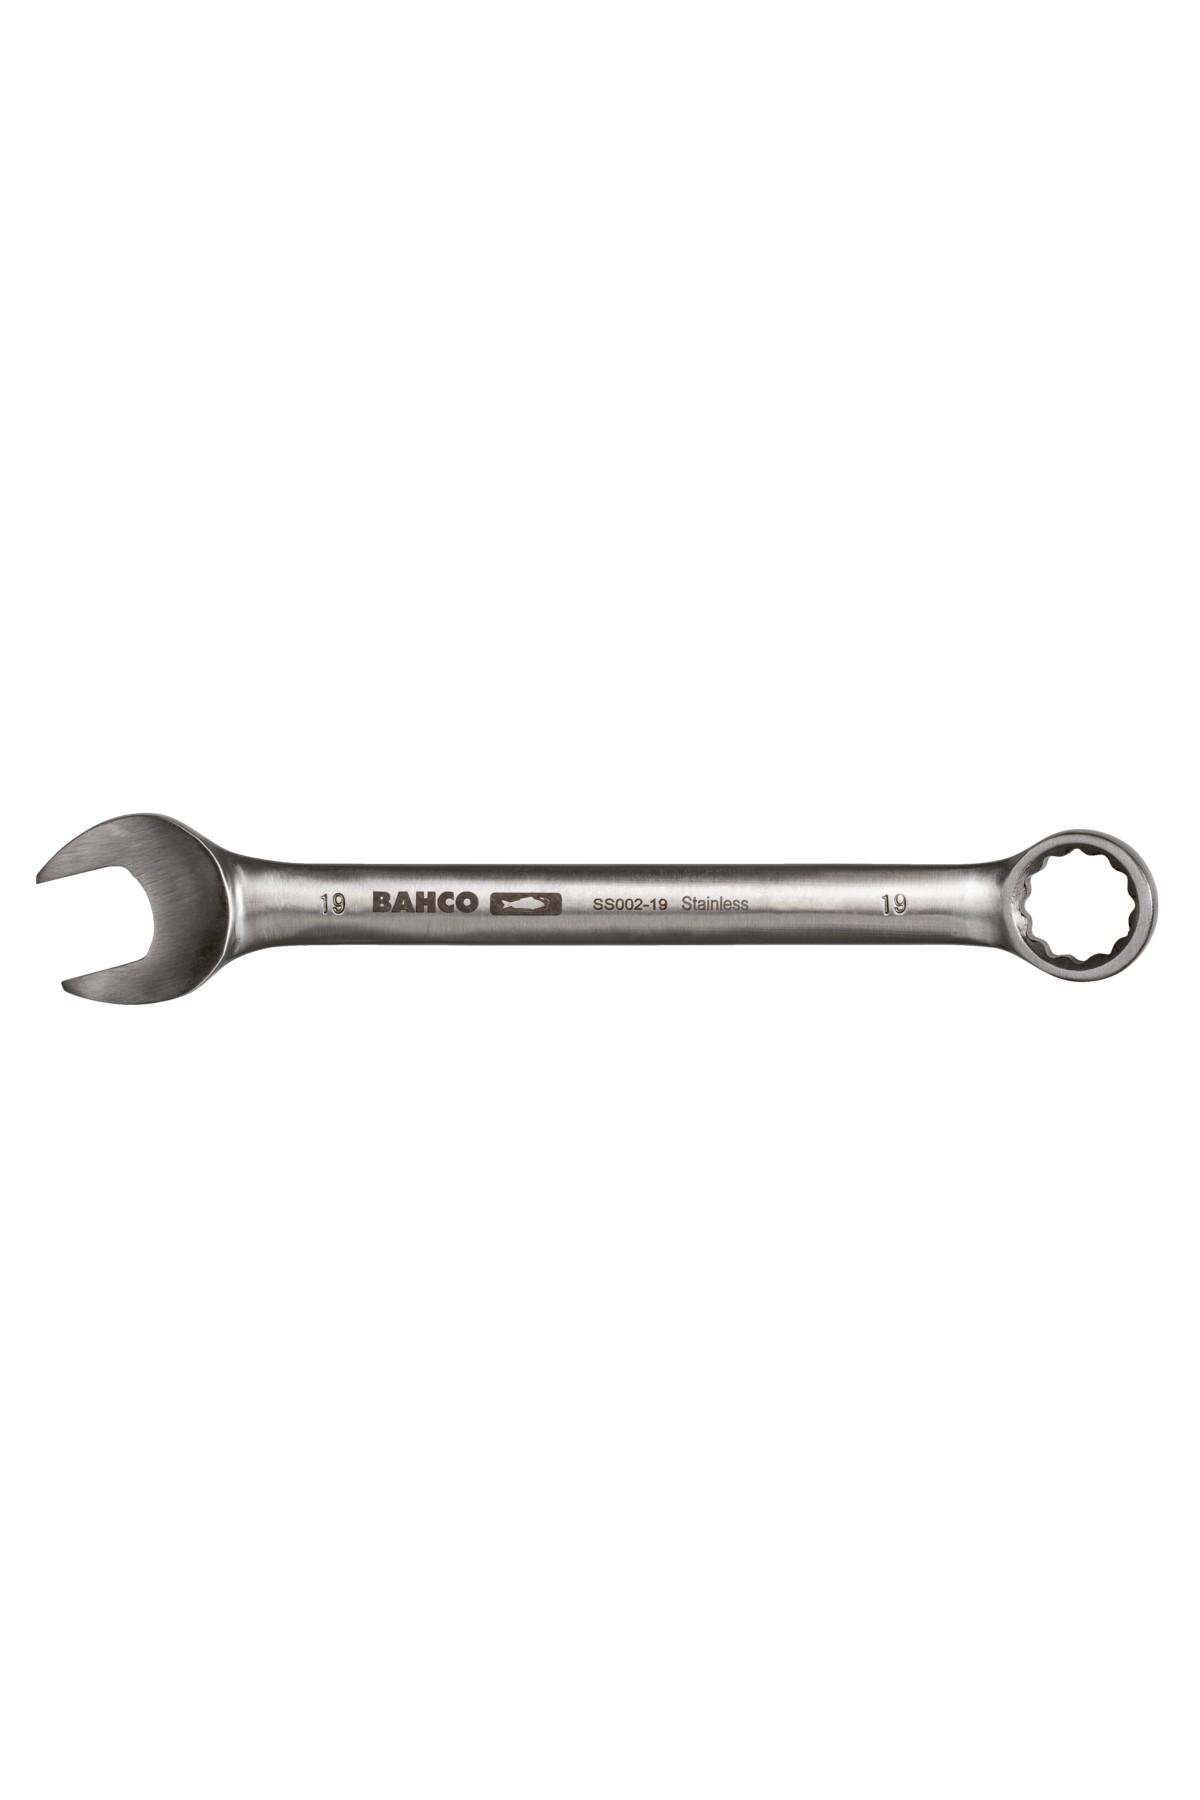 Ring spanner stainless steel SS003 1/2